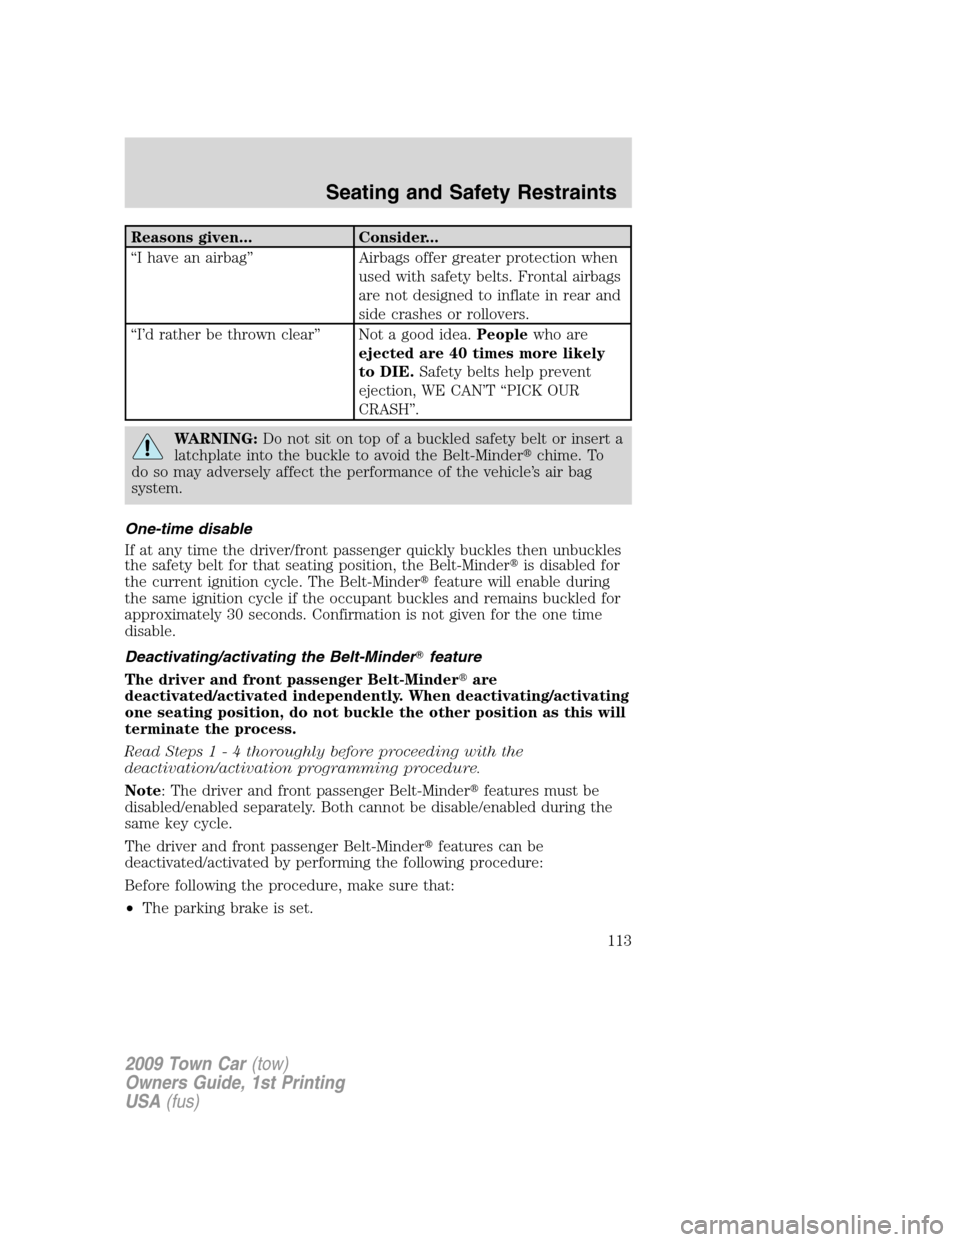 LINCOLN TOWN CAR 2009  Owners Manual Reasons given... Consider...
“I have an airbag” Airbags offer greater protection when
used with safety belts. Frontal airbags
are not designed to inflate in rear and
side crashes or rollovers.
“